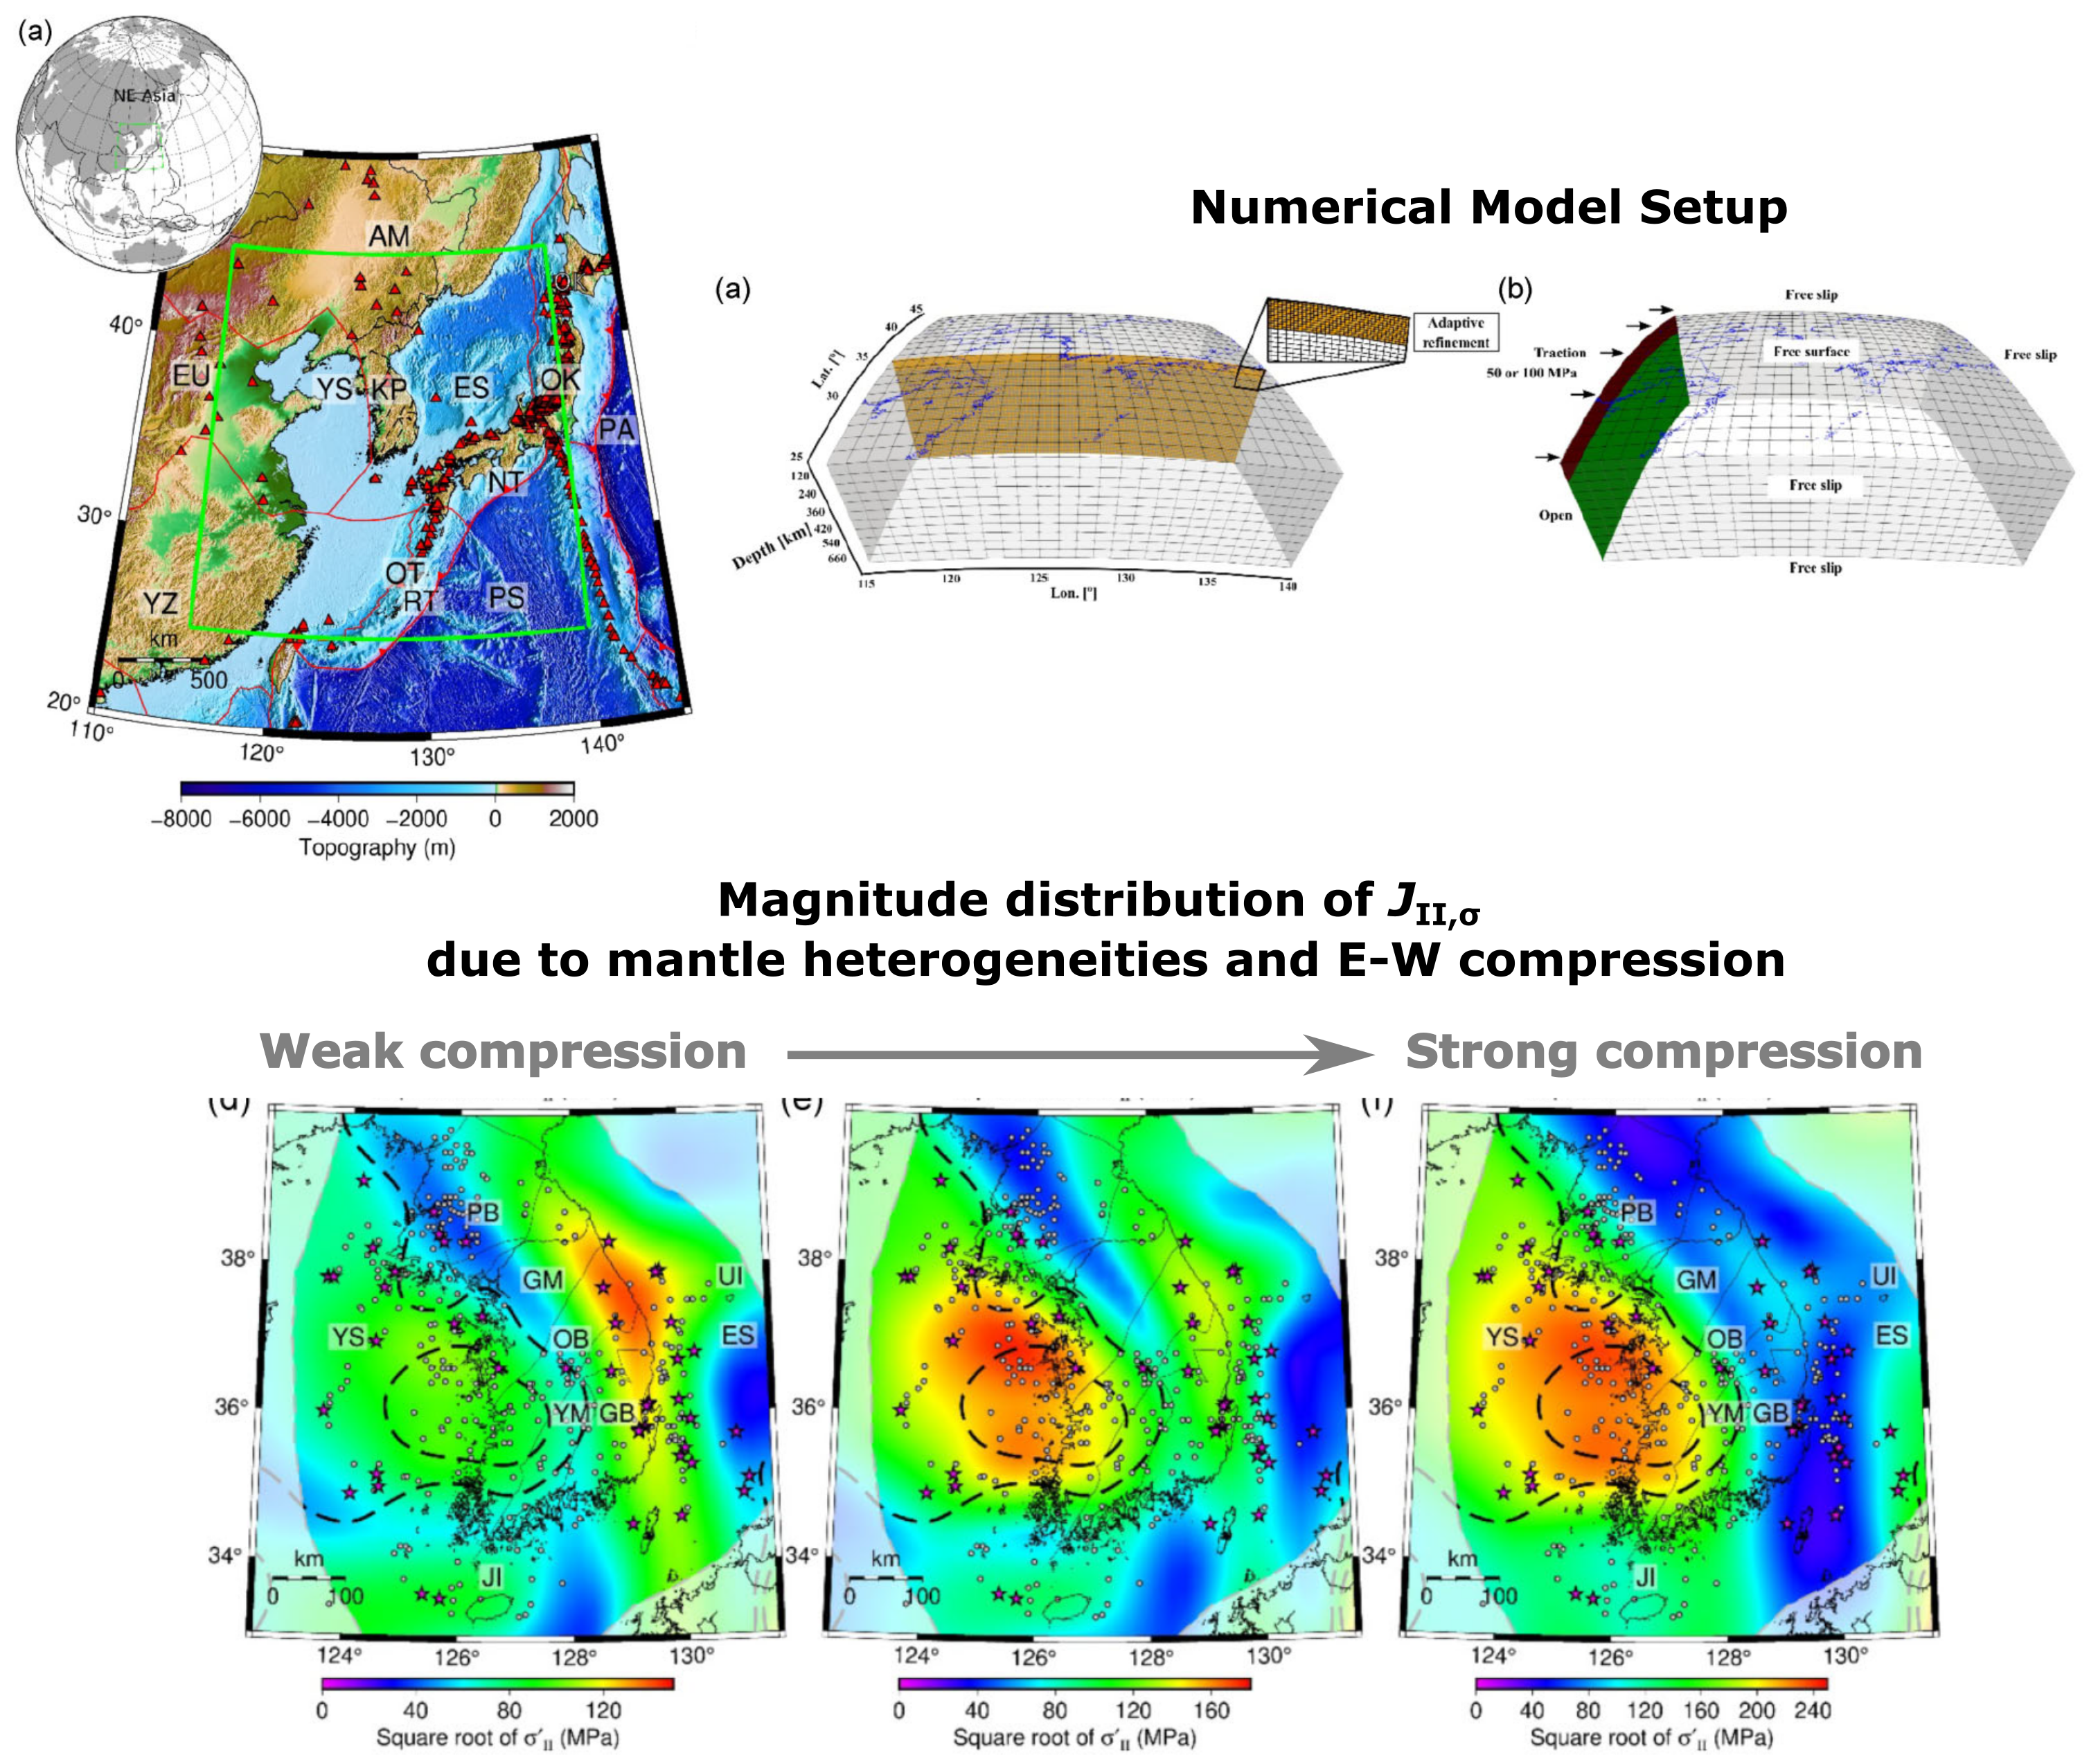 A study on the stress contributions from the mantle heterogeneity and the regional east-west compression to the seismicity in the Korean peninsular. The second invariant of deviatoric stresses arising from the regional compression and the mantle flow driven by the mantle heterogeneity are seen correlated with the shallow (< 15 km depth) seismicity in the region. For more details, see [(Lee et al., GJI, 2022)](https://academic.oup.com/gji/advance-article/doi/10.1093/gji/ggab527/6488384)